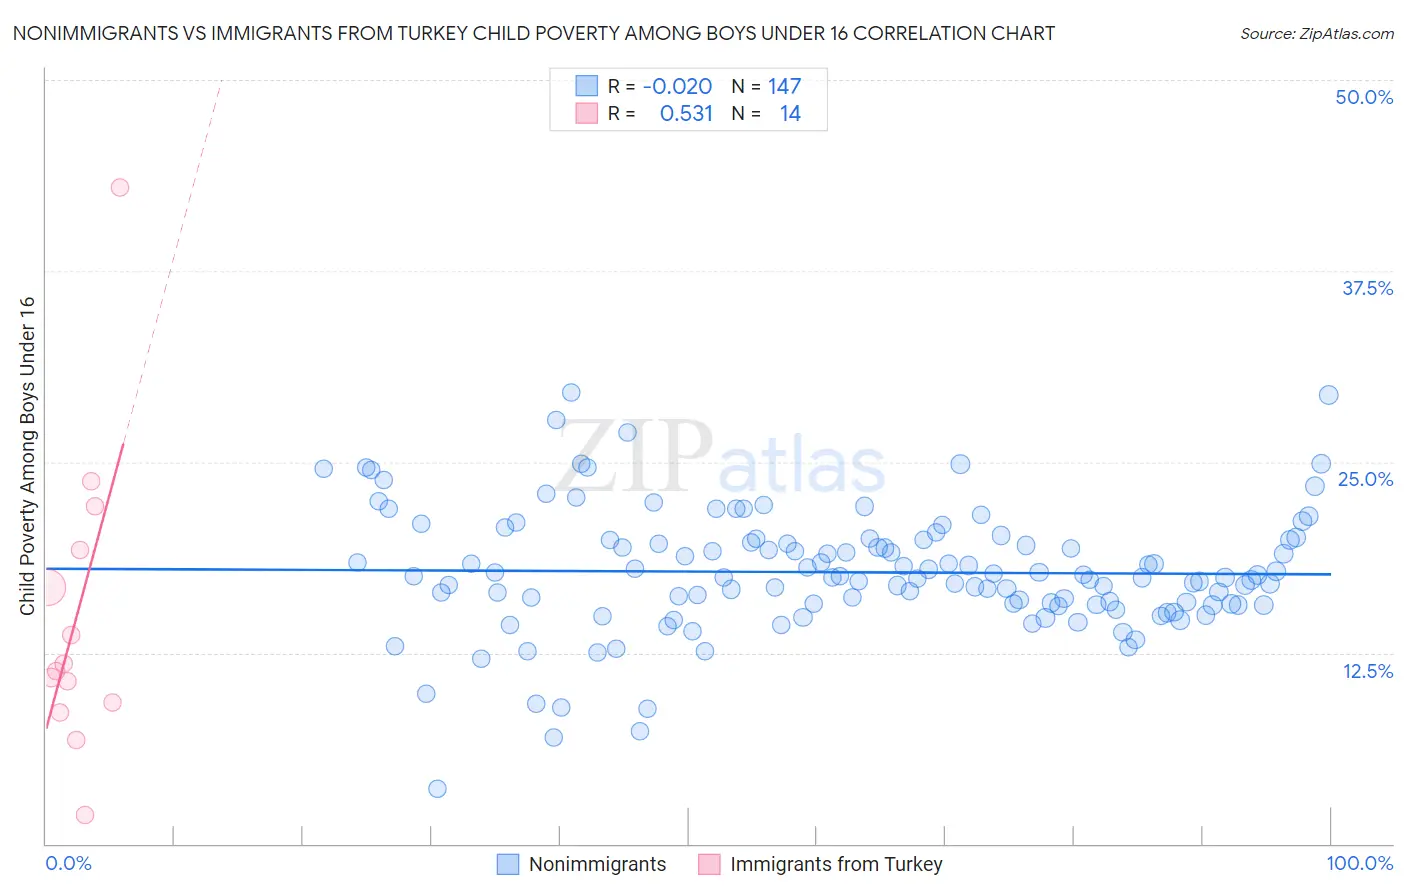 Nonimmigrants vs Immigrants from Turkey Child Poverty Among Boys Under 16